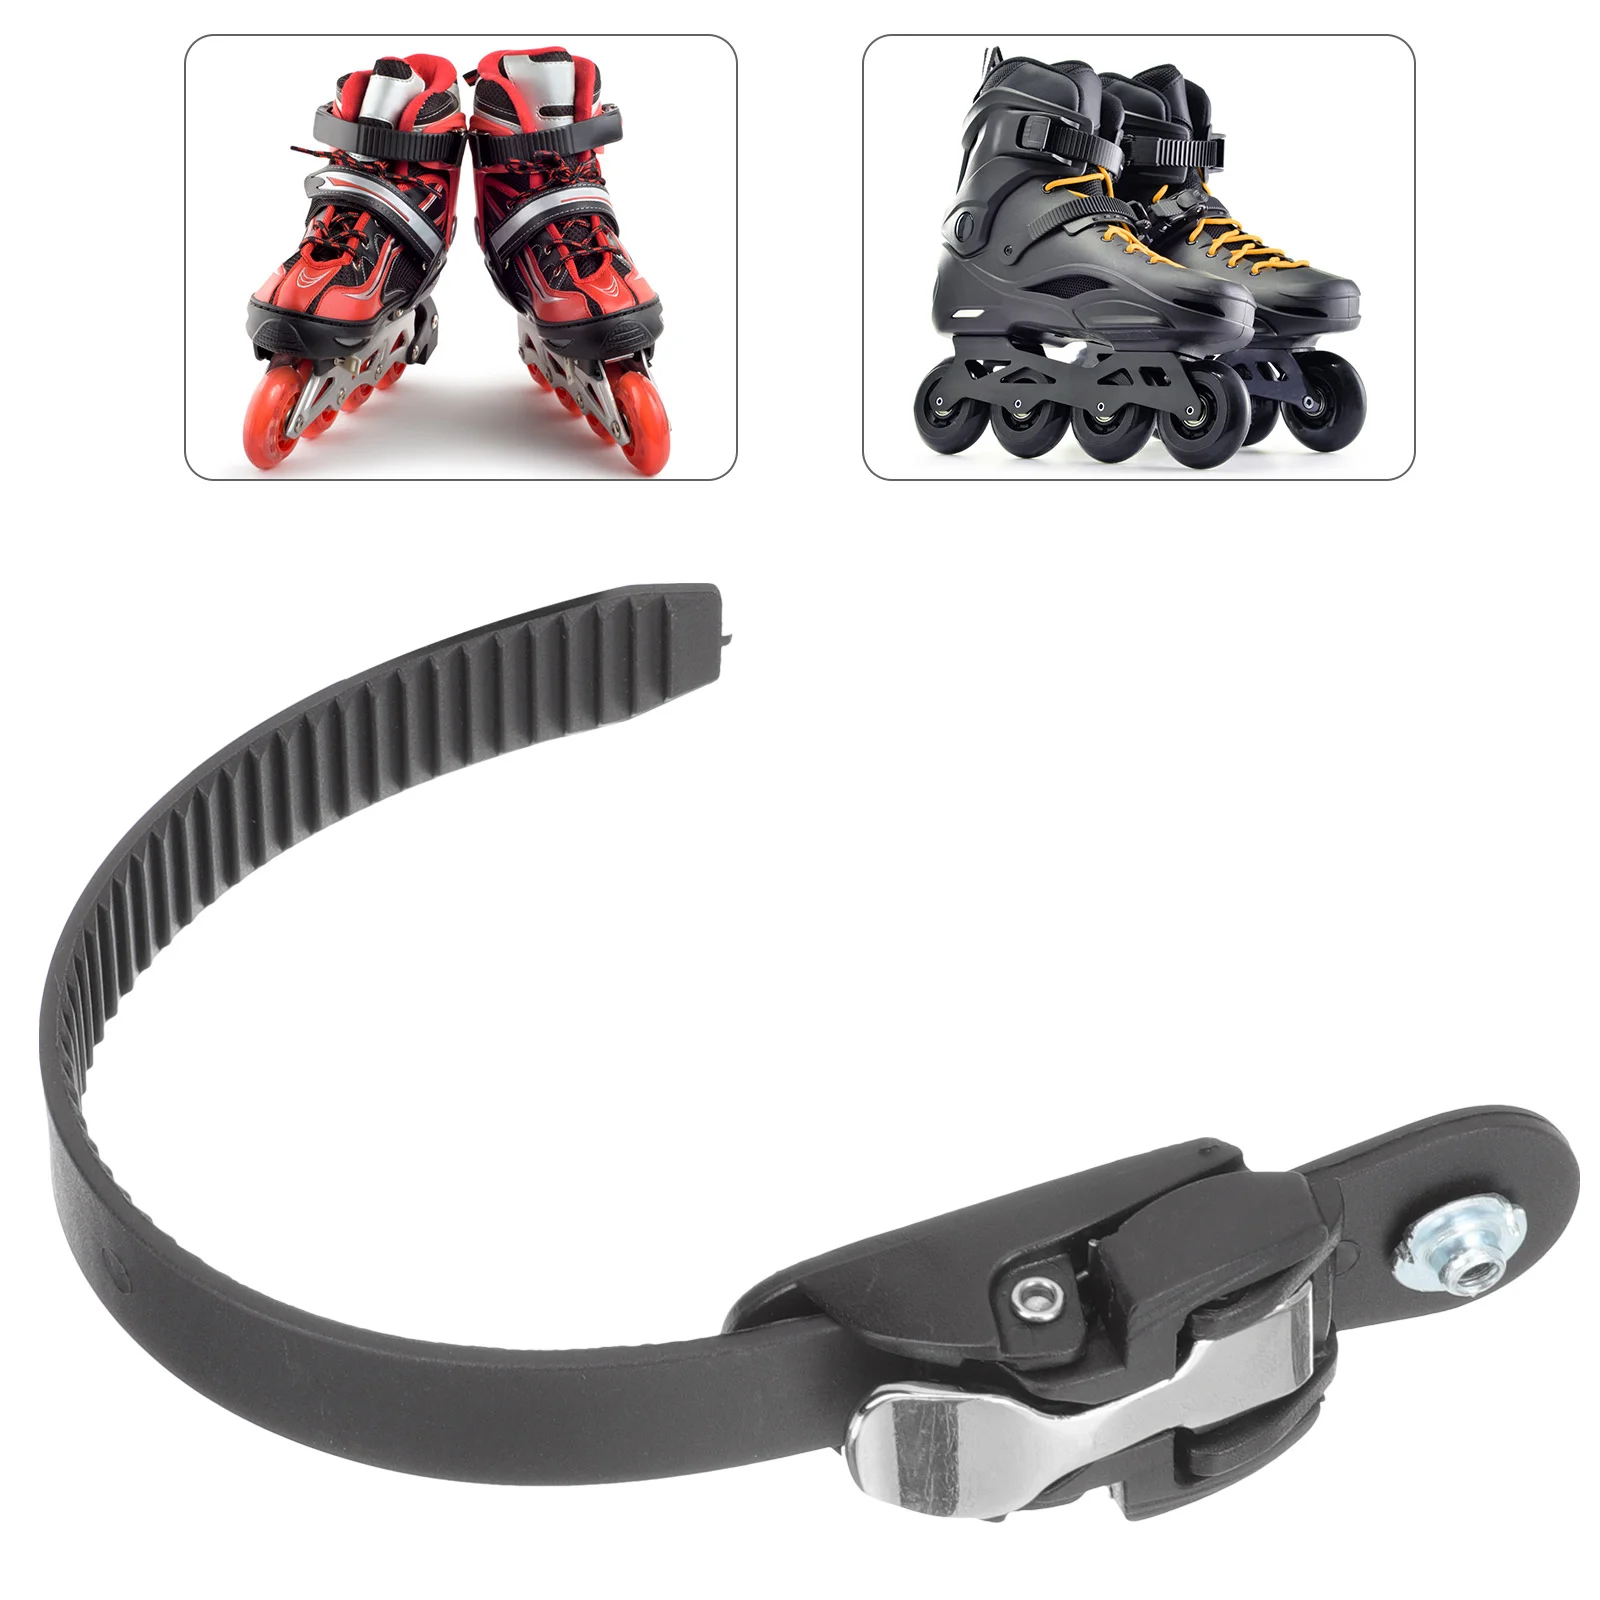 

The Skating Shoes Buckle Shoelaces Ice Skates Repair Strap Leash Equipment Supplies Fixing Pvc Roller Clasp Straps